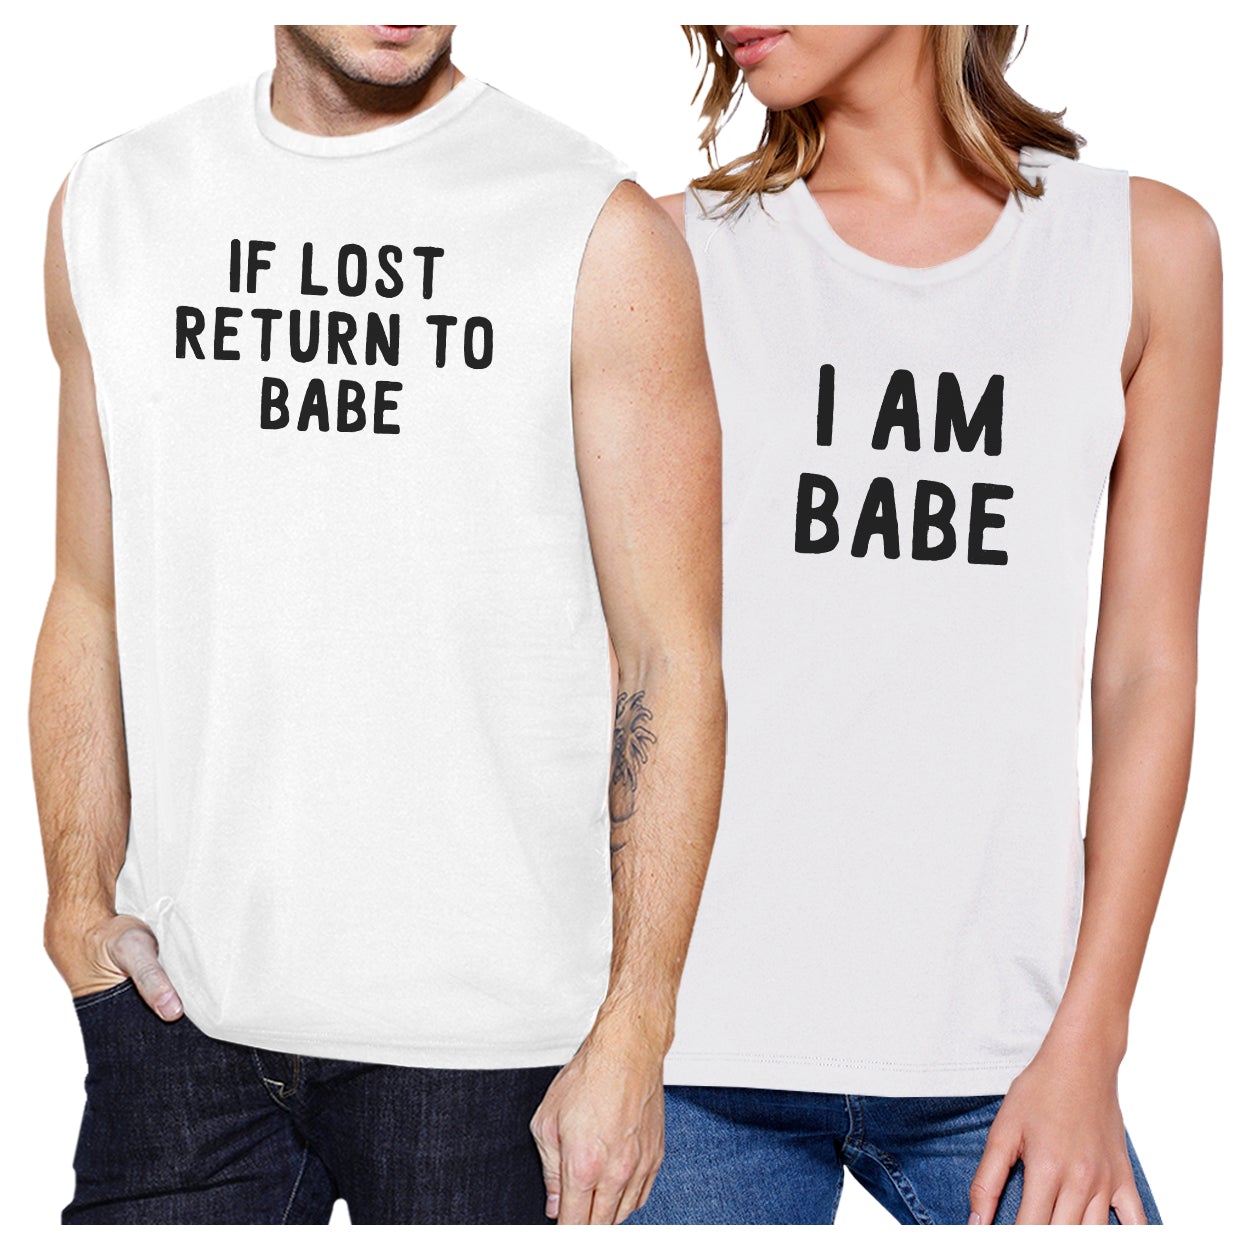 If Lost Return To Babe And I Am Babe Matching Couple White Muscle Top